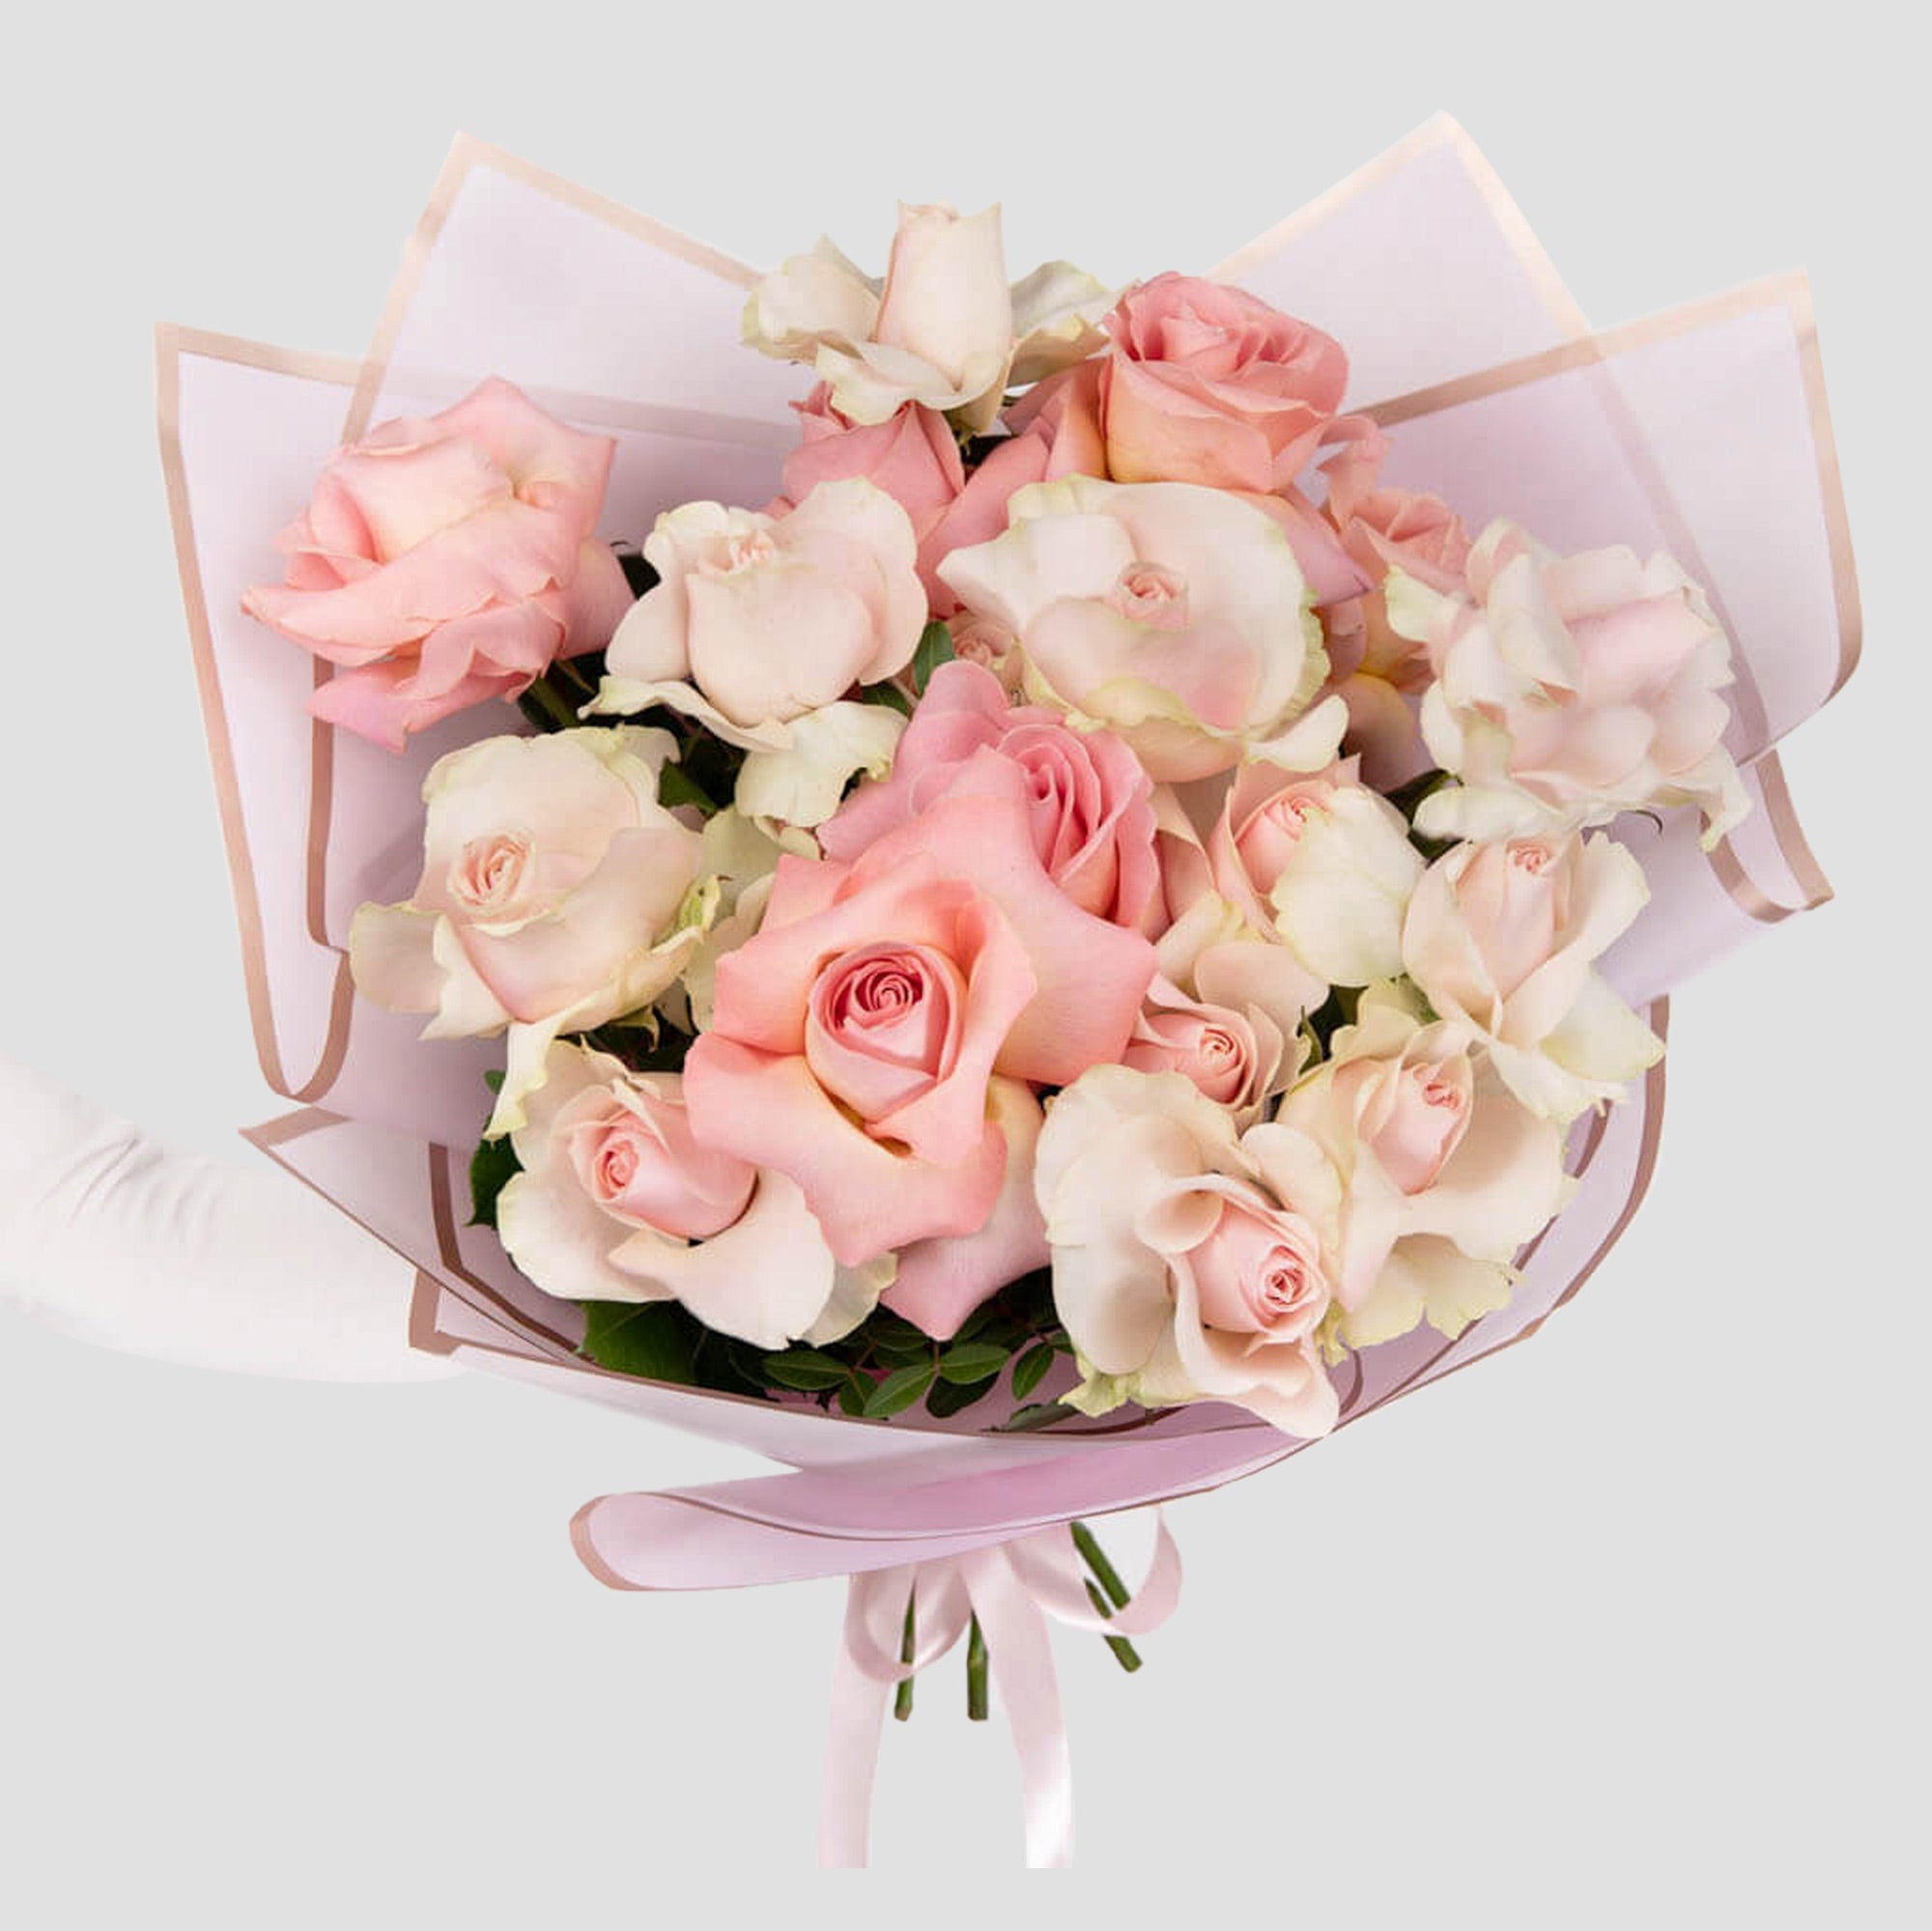 Bouquet with 17 special pink roses